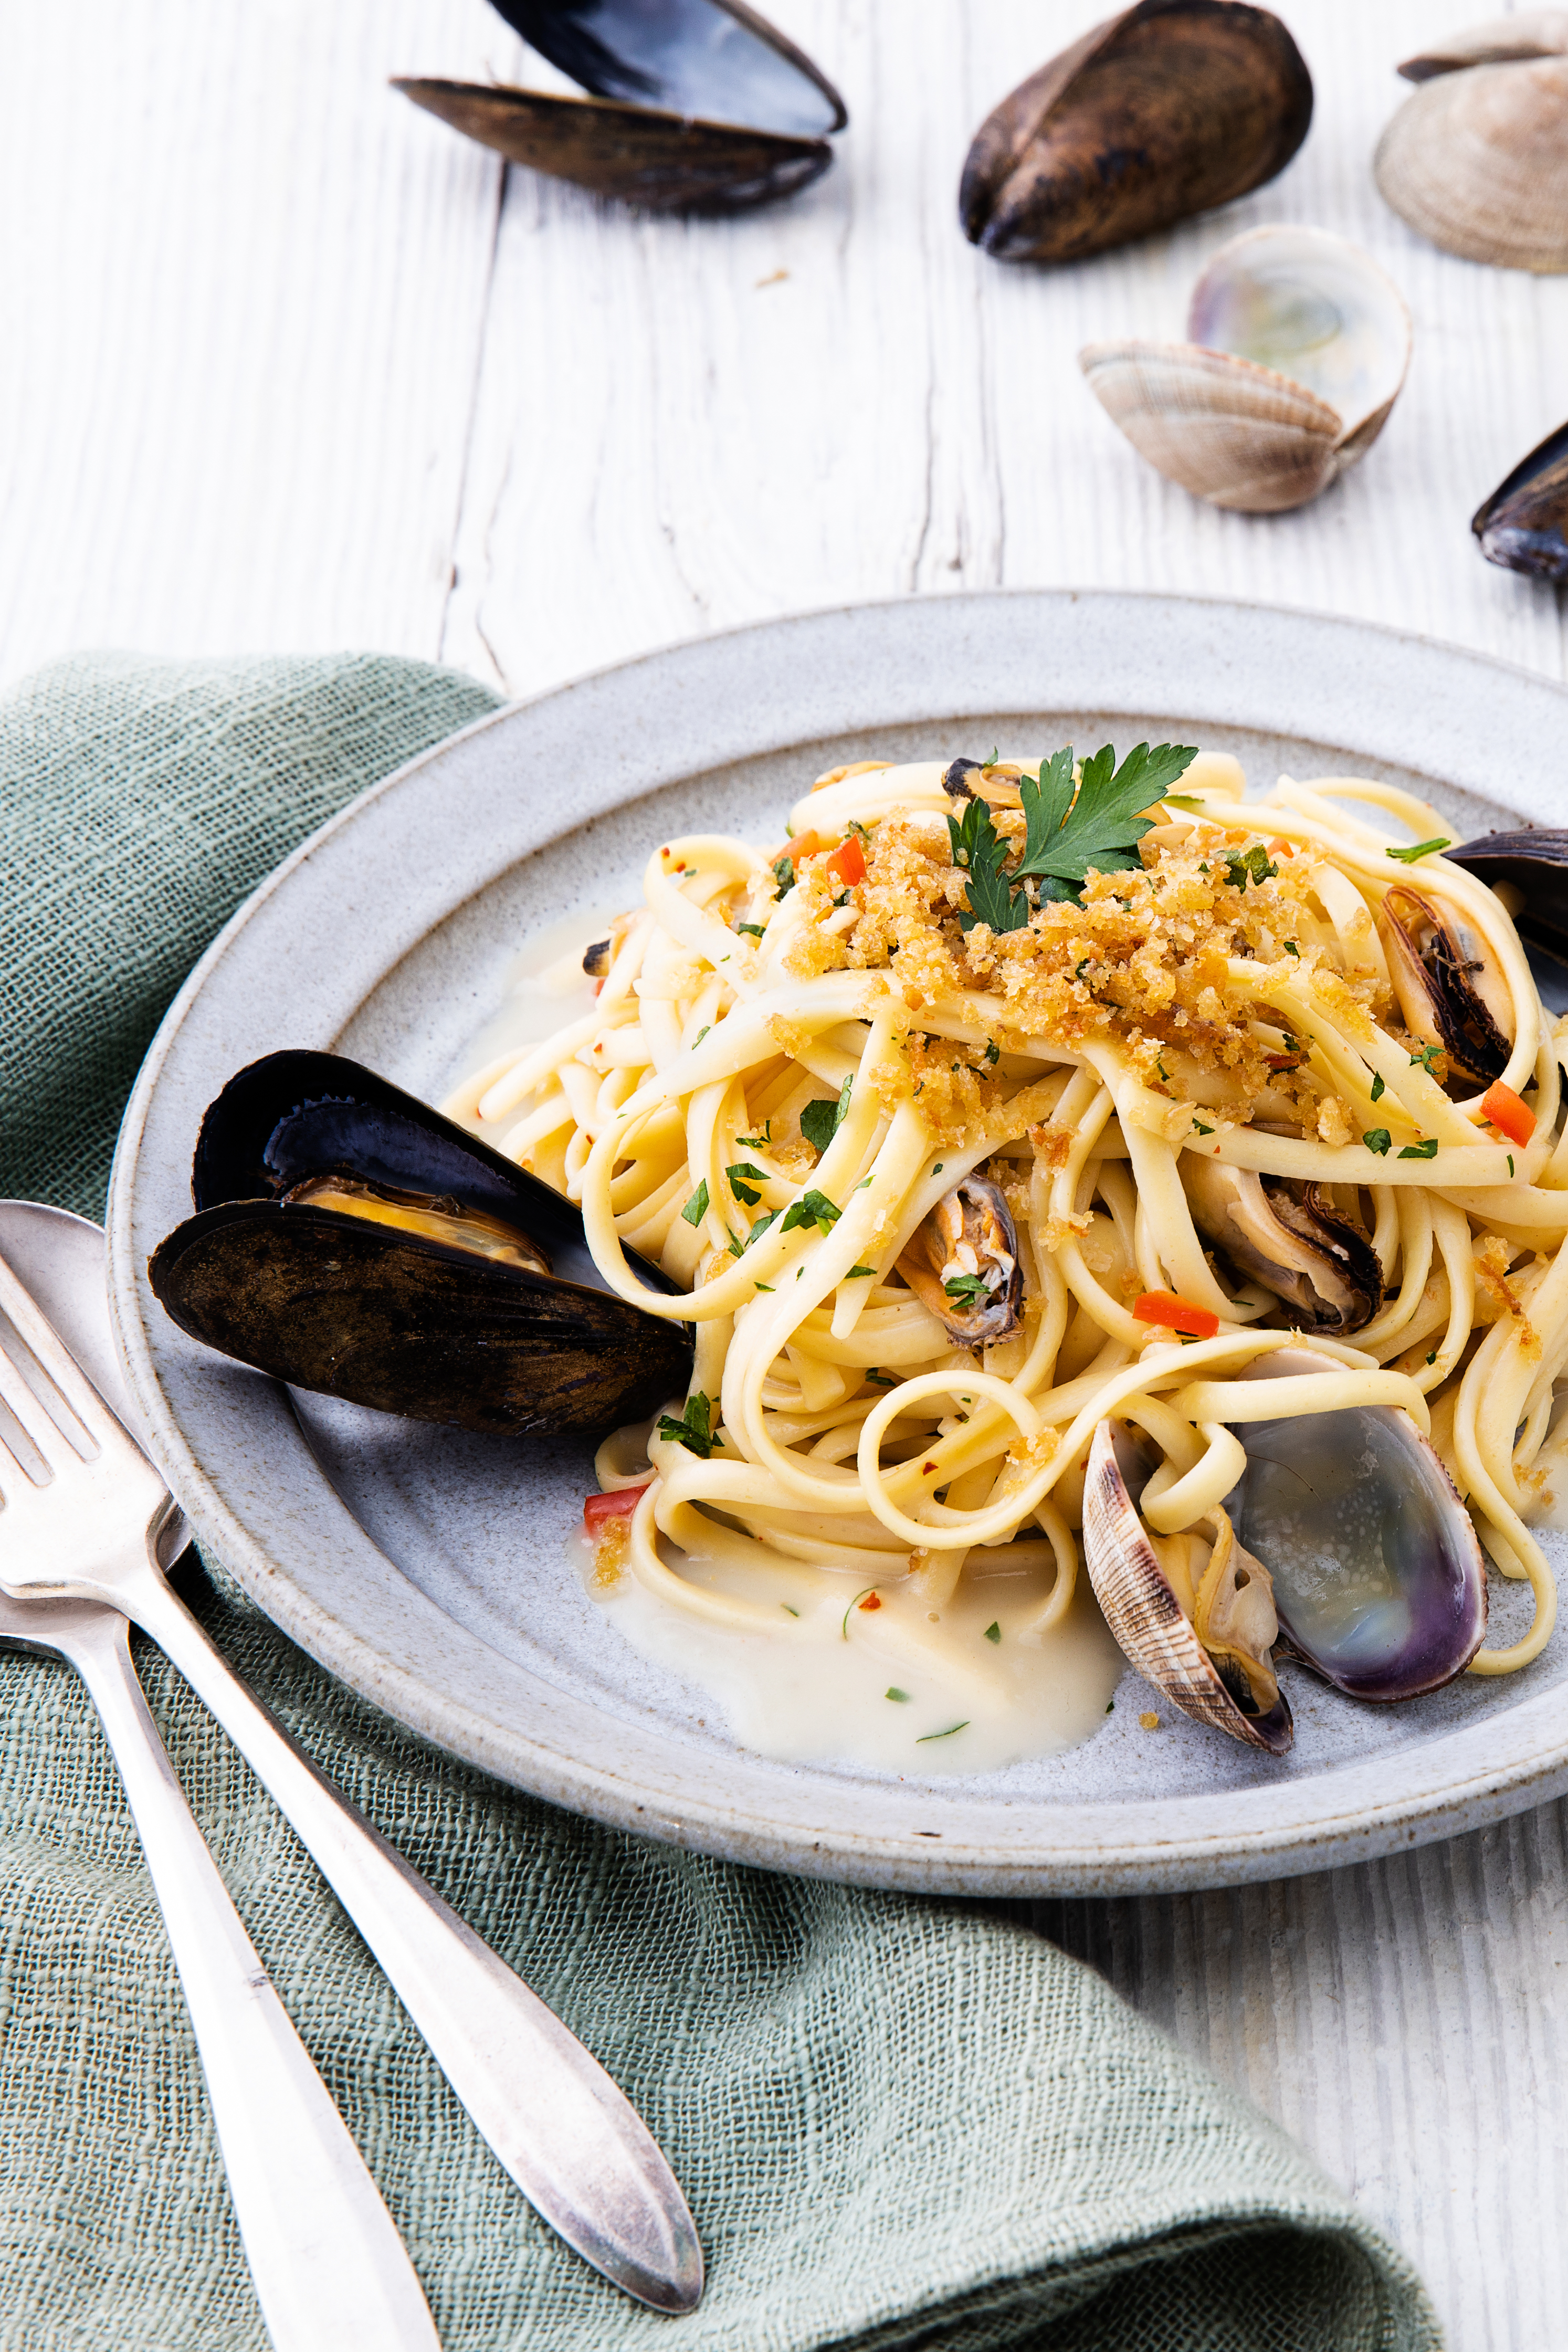 Barilla Restaurants Celebrates The Season With Its "Feast of The Seven Fishes" Menu